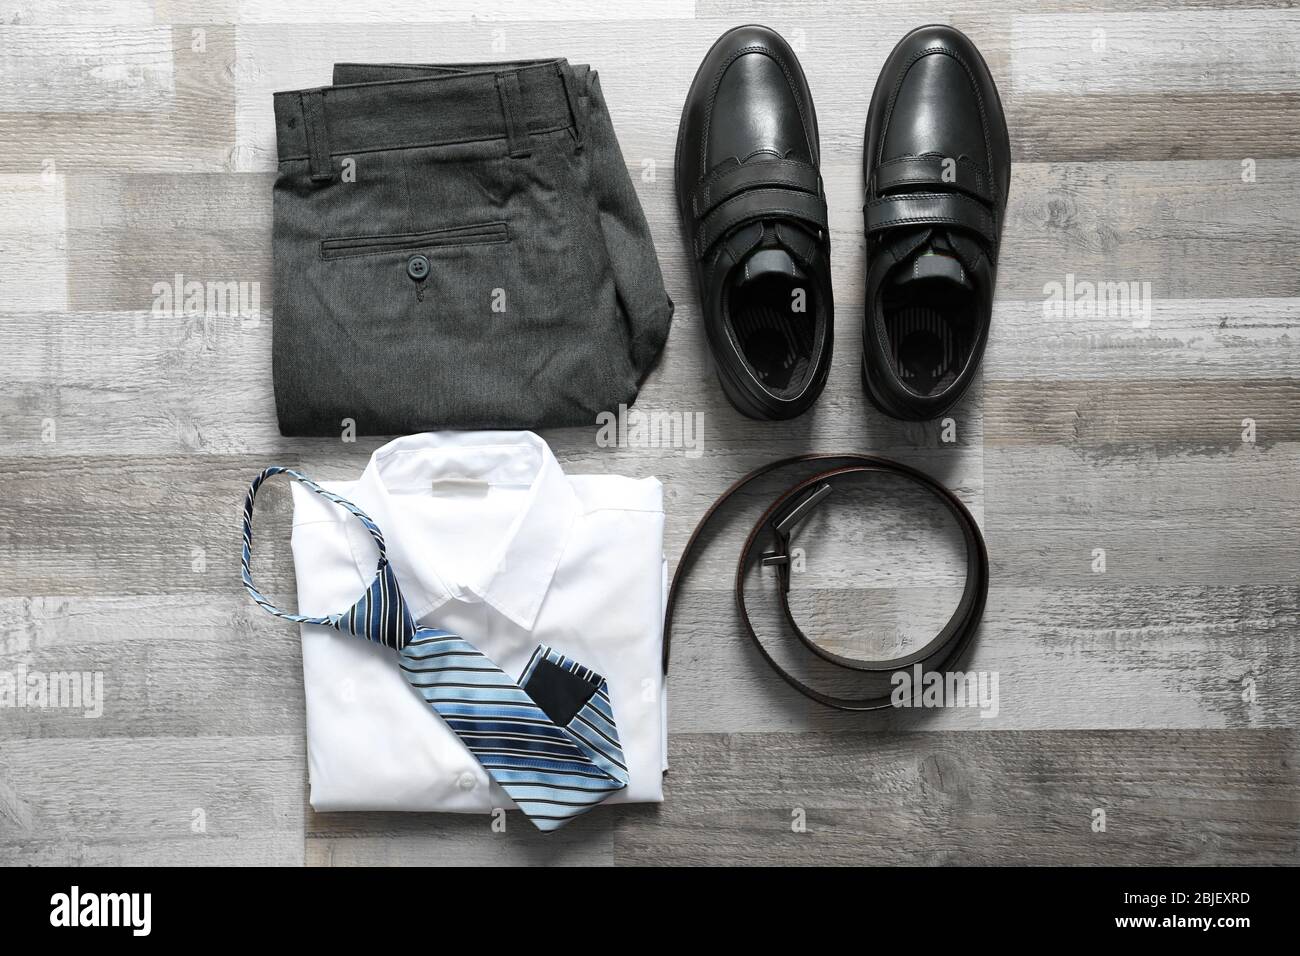 Clothes of schoolboy on wooden floor, flat lay Stock Photo